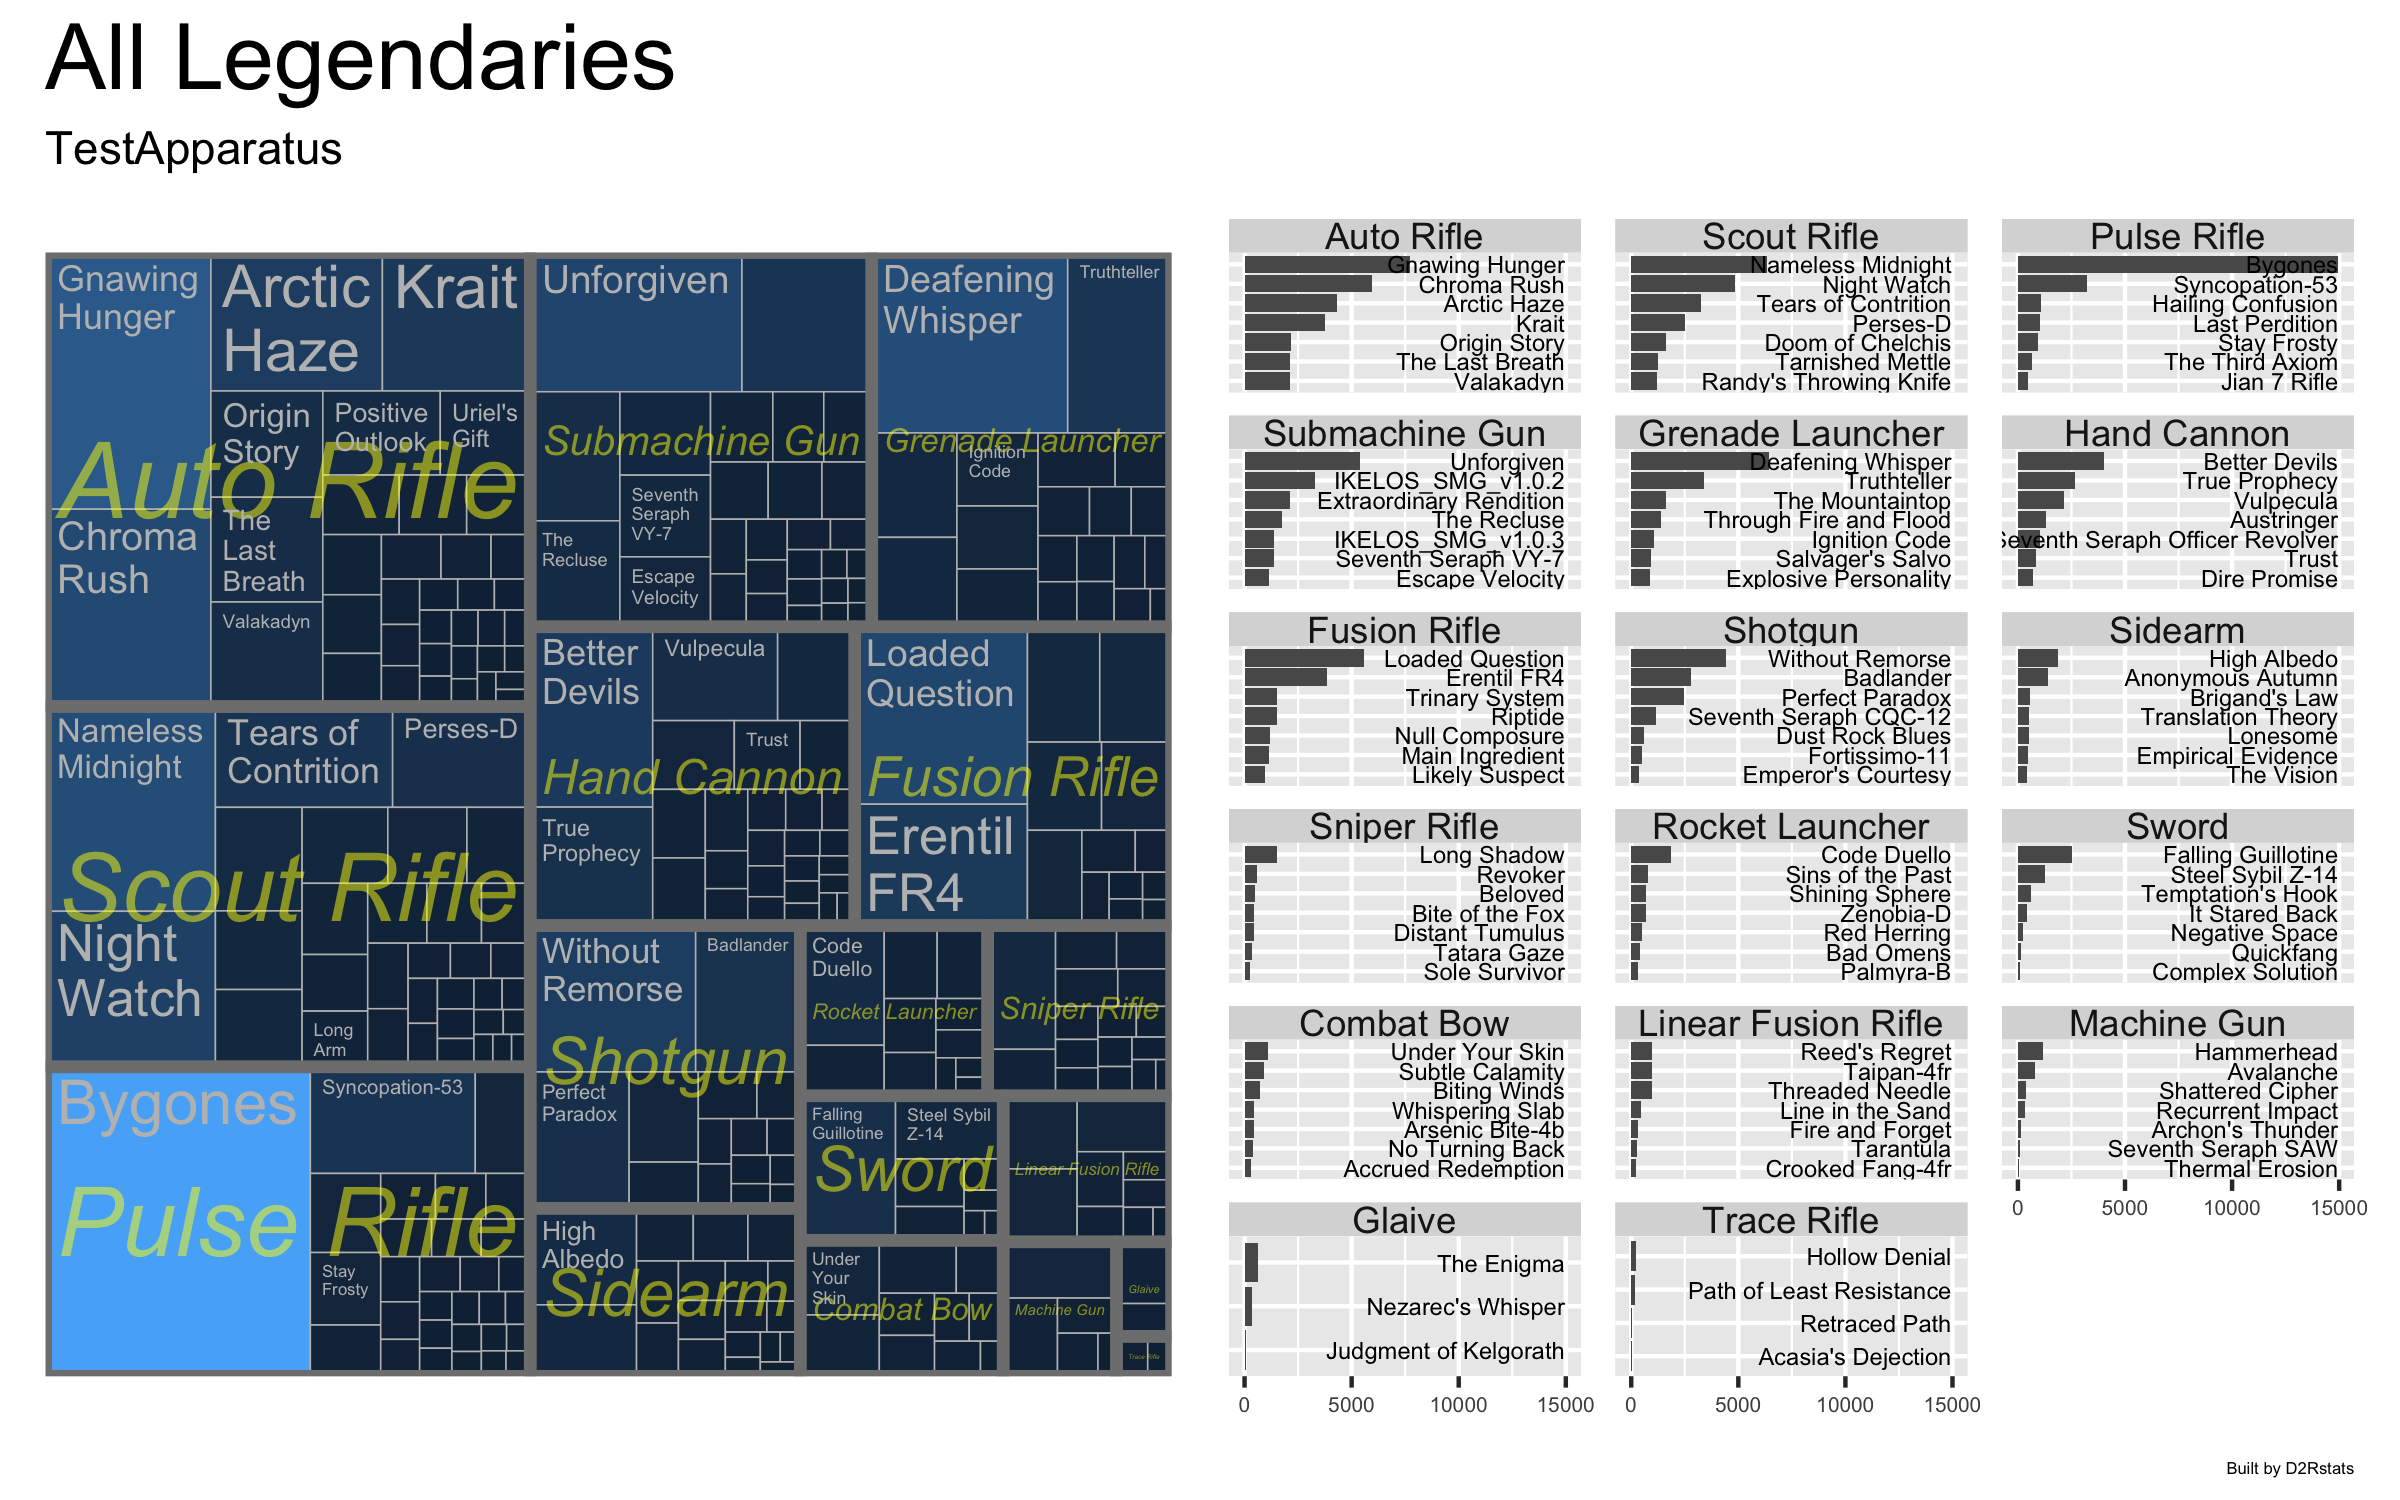 screenshot showing a treemap of Destiny 2 weapon usage. My largest single category is auto rifle, and the largest single weapon is Bygones.